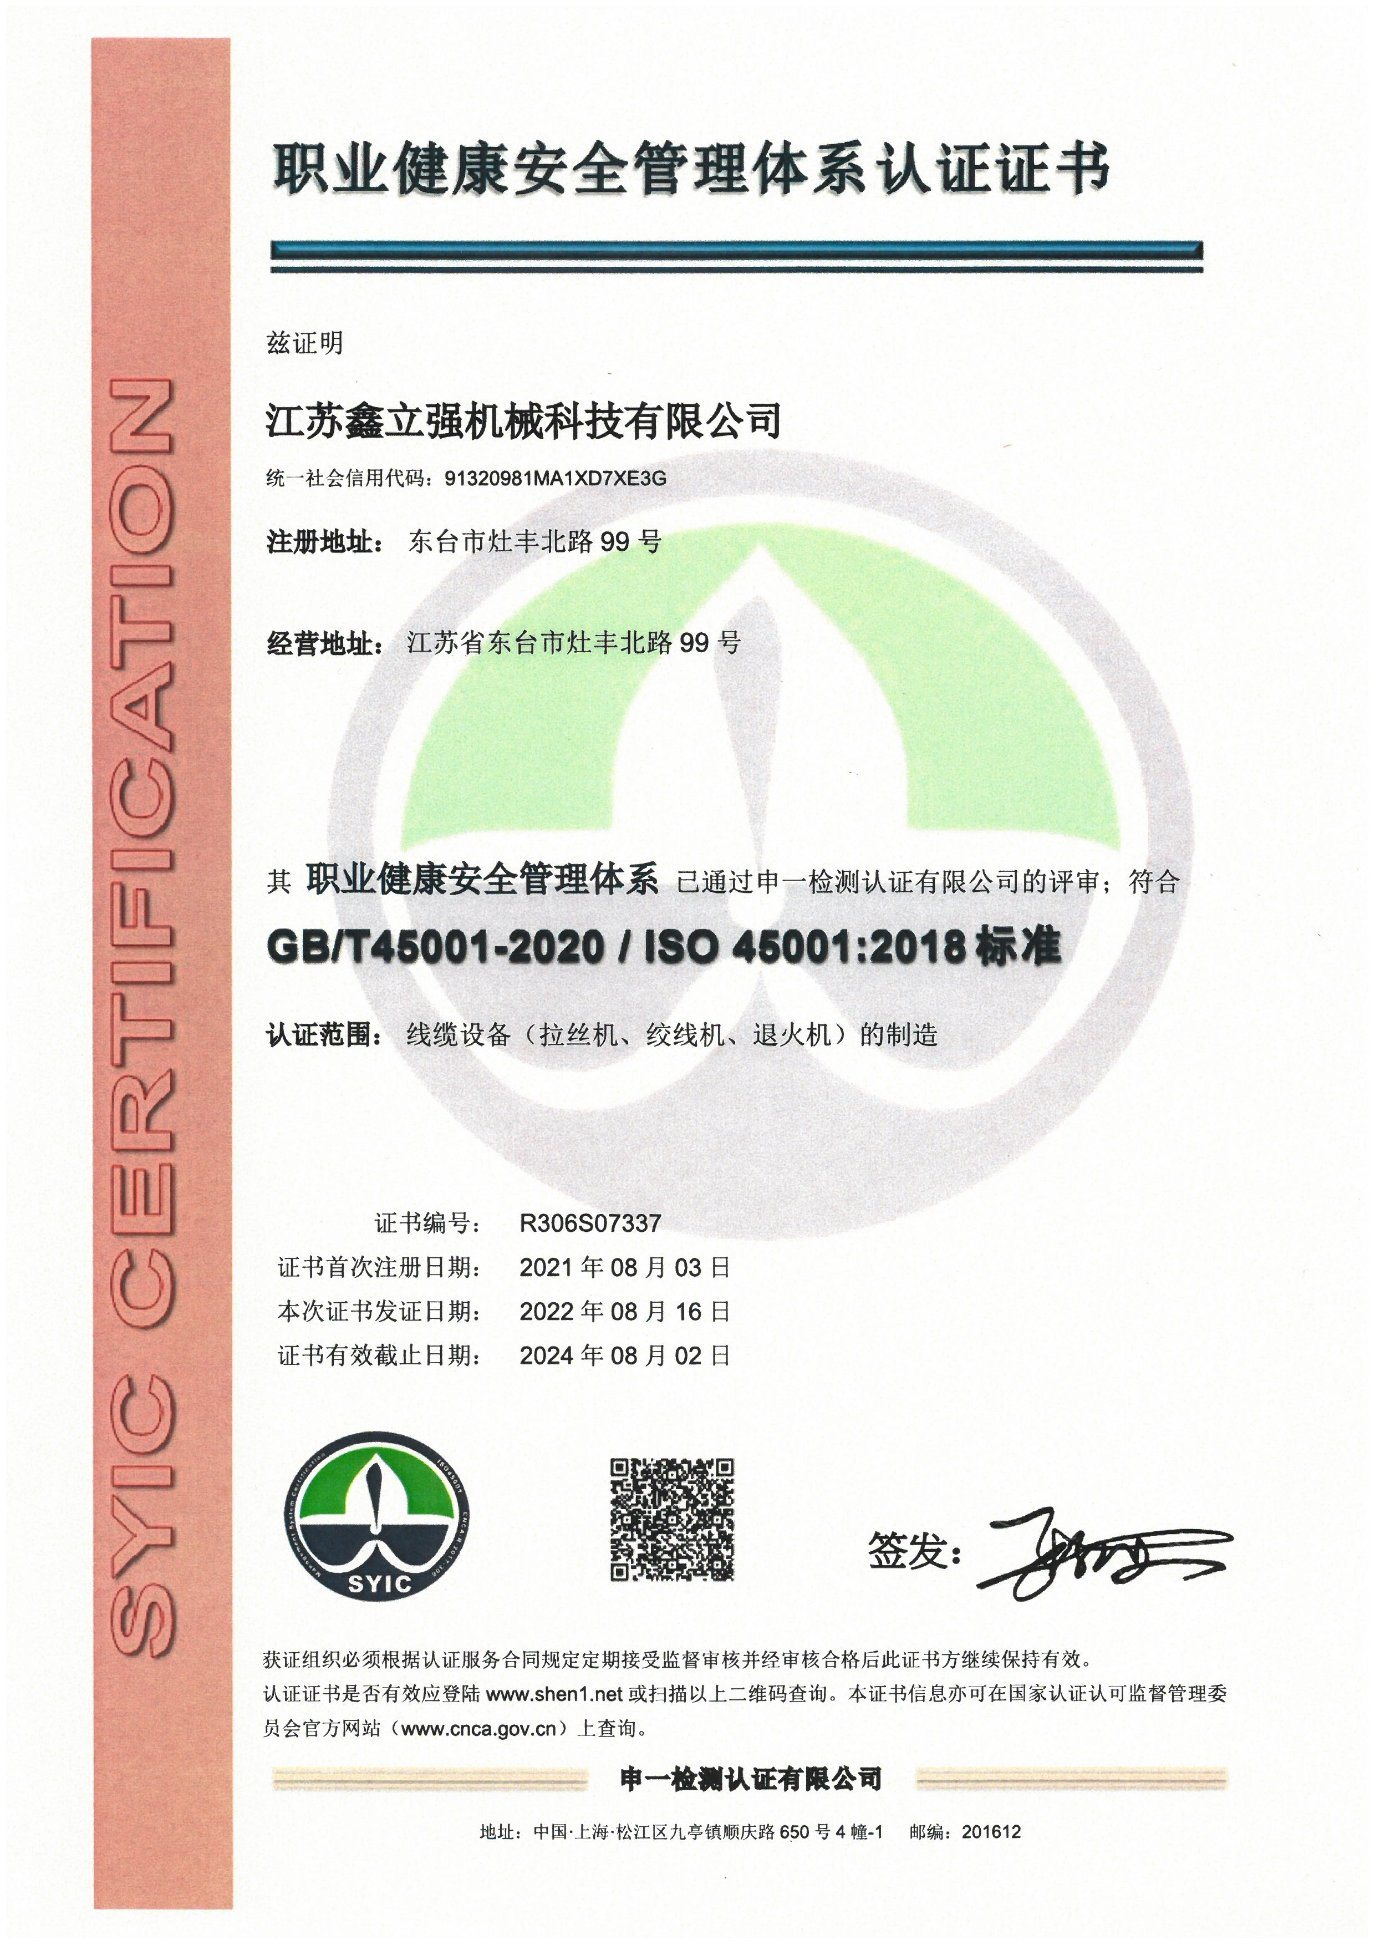 Occupational Health and Safety Management Certification